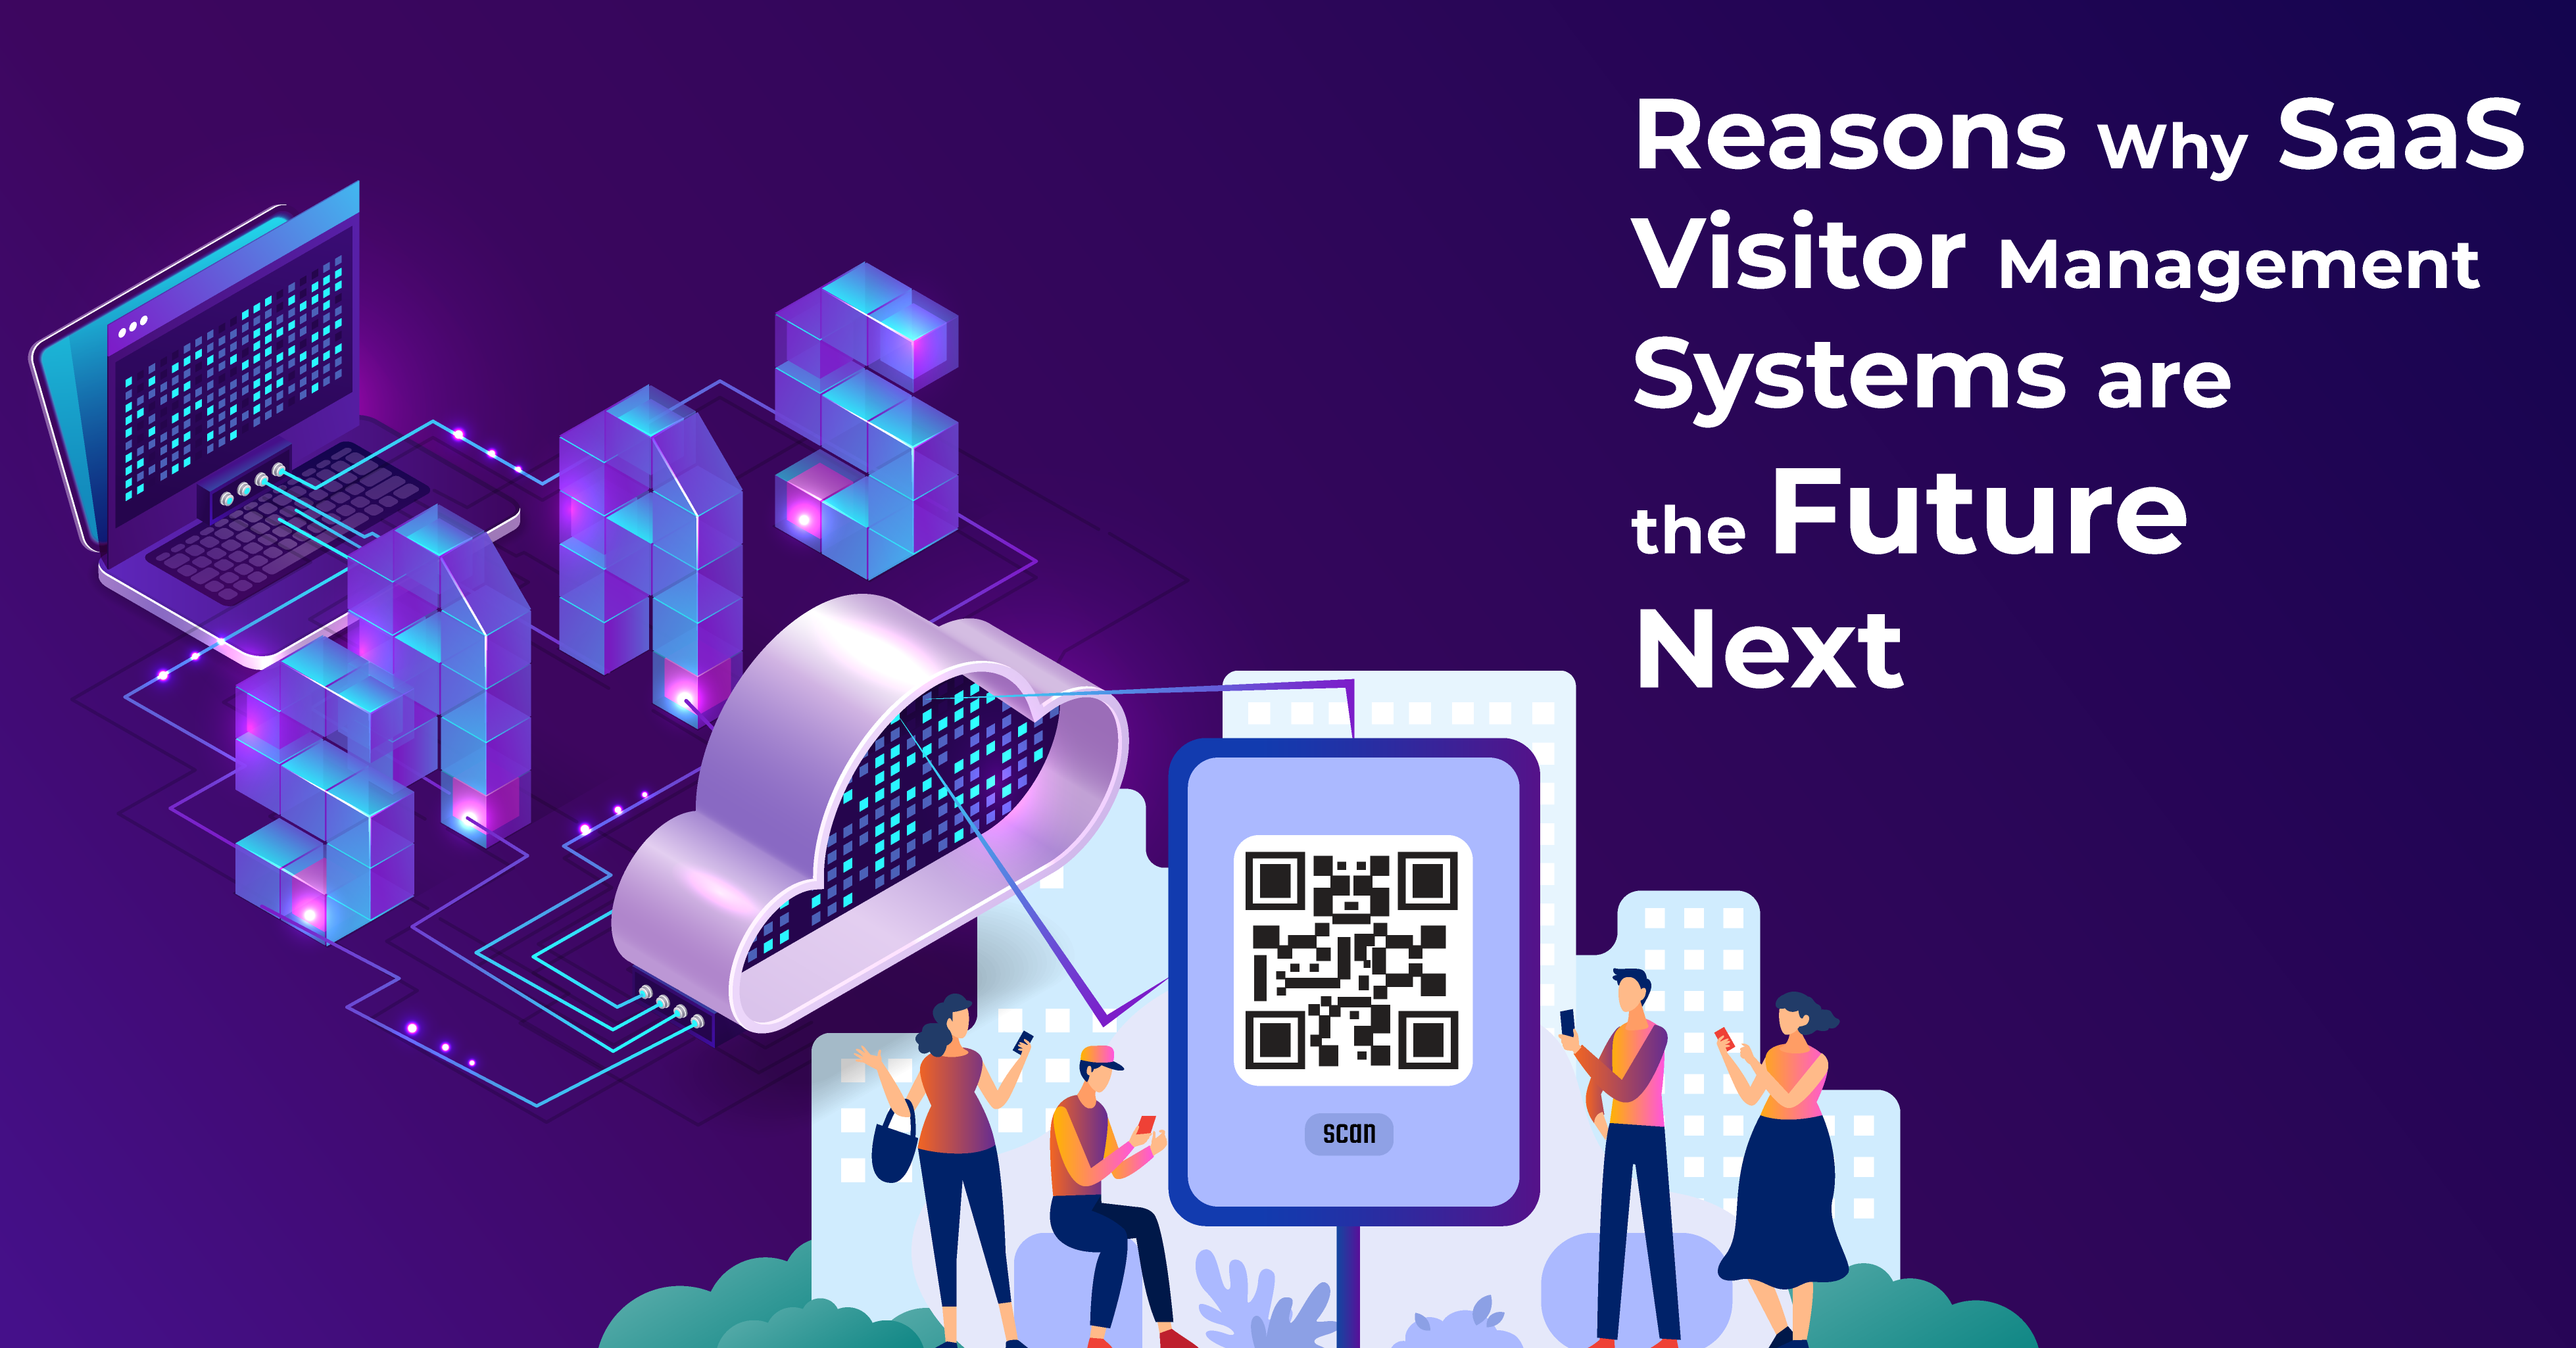 SaaS Visitor Management Systems are the Future Next